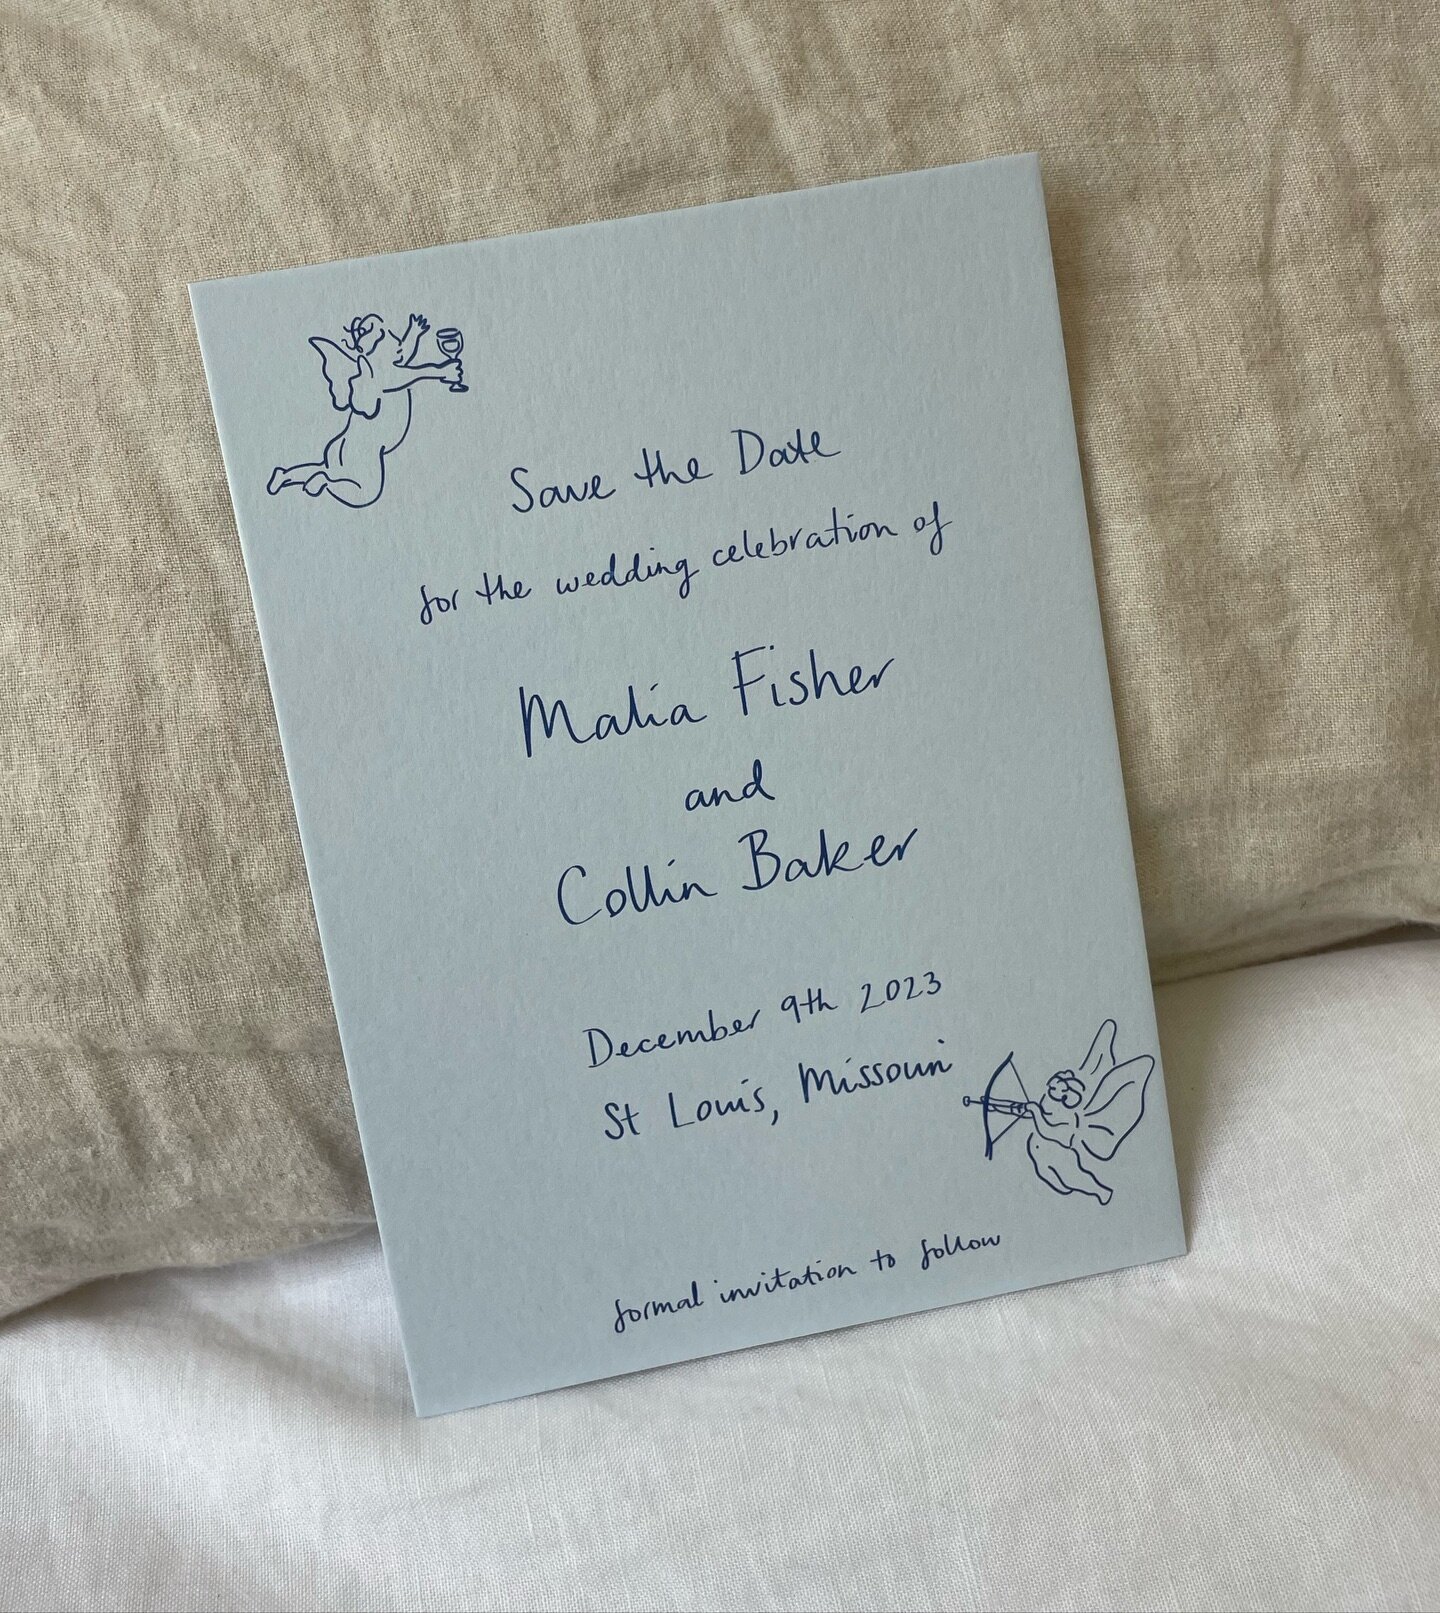 🤍 ☁️ 💍 
A simple save the date design with some loose scribbles for Malia &amp; Collin tied the knot last month

#weddingstationery #bespokestationery #bespoke #stationery